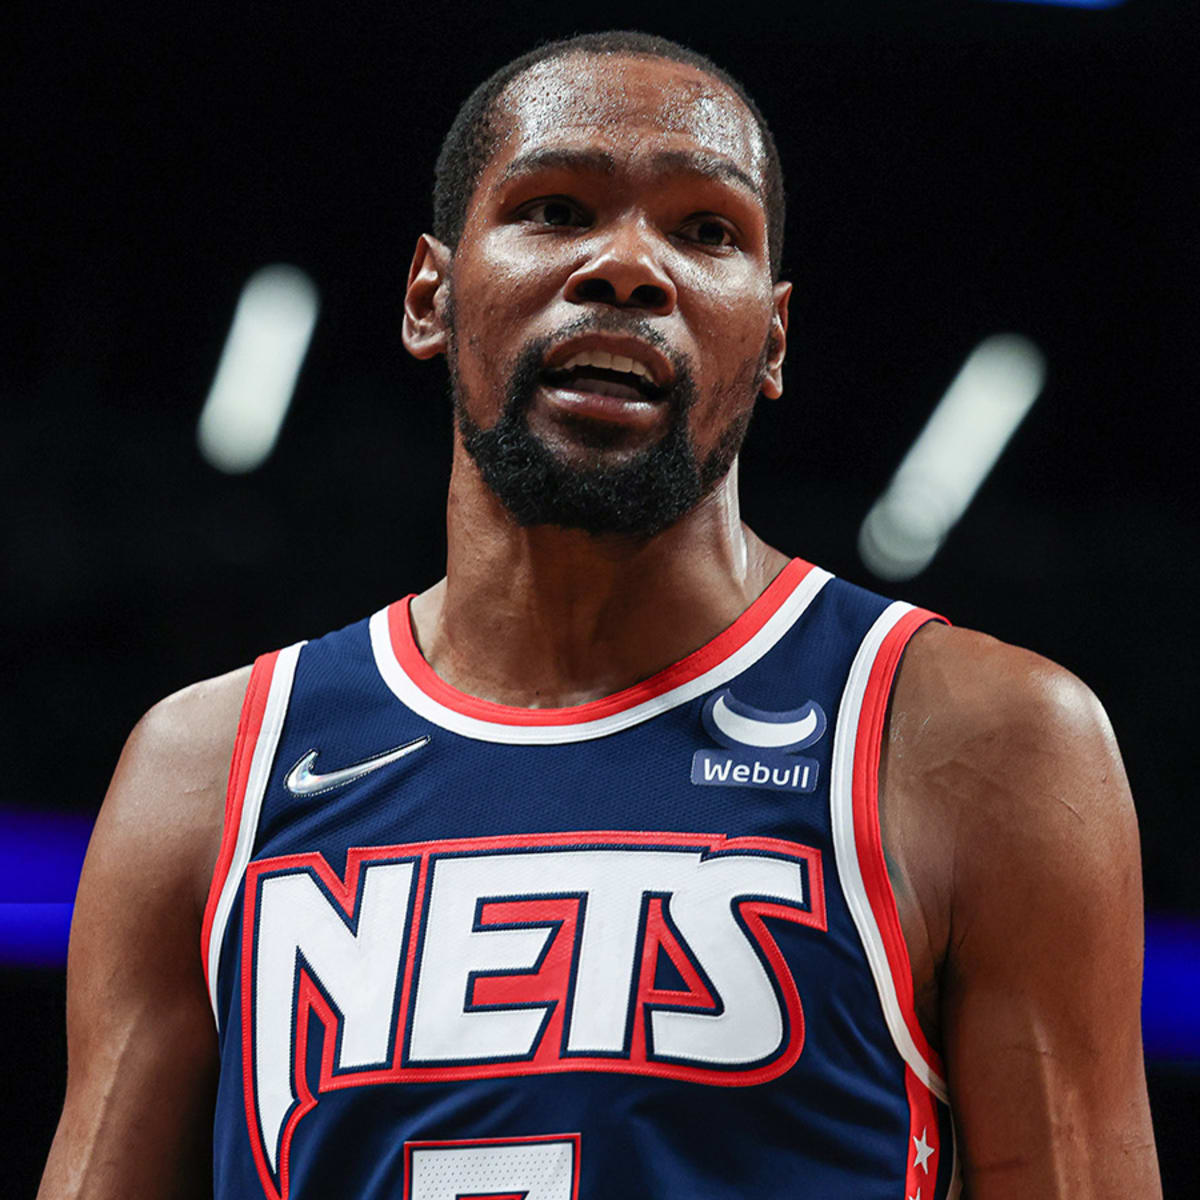 Kevin Durant: NBA superstar requests trade from Brooklyn Nets, per reports